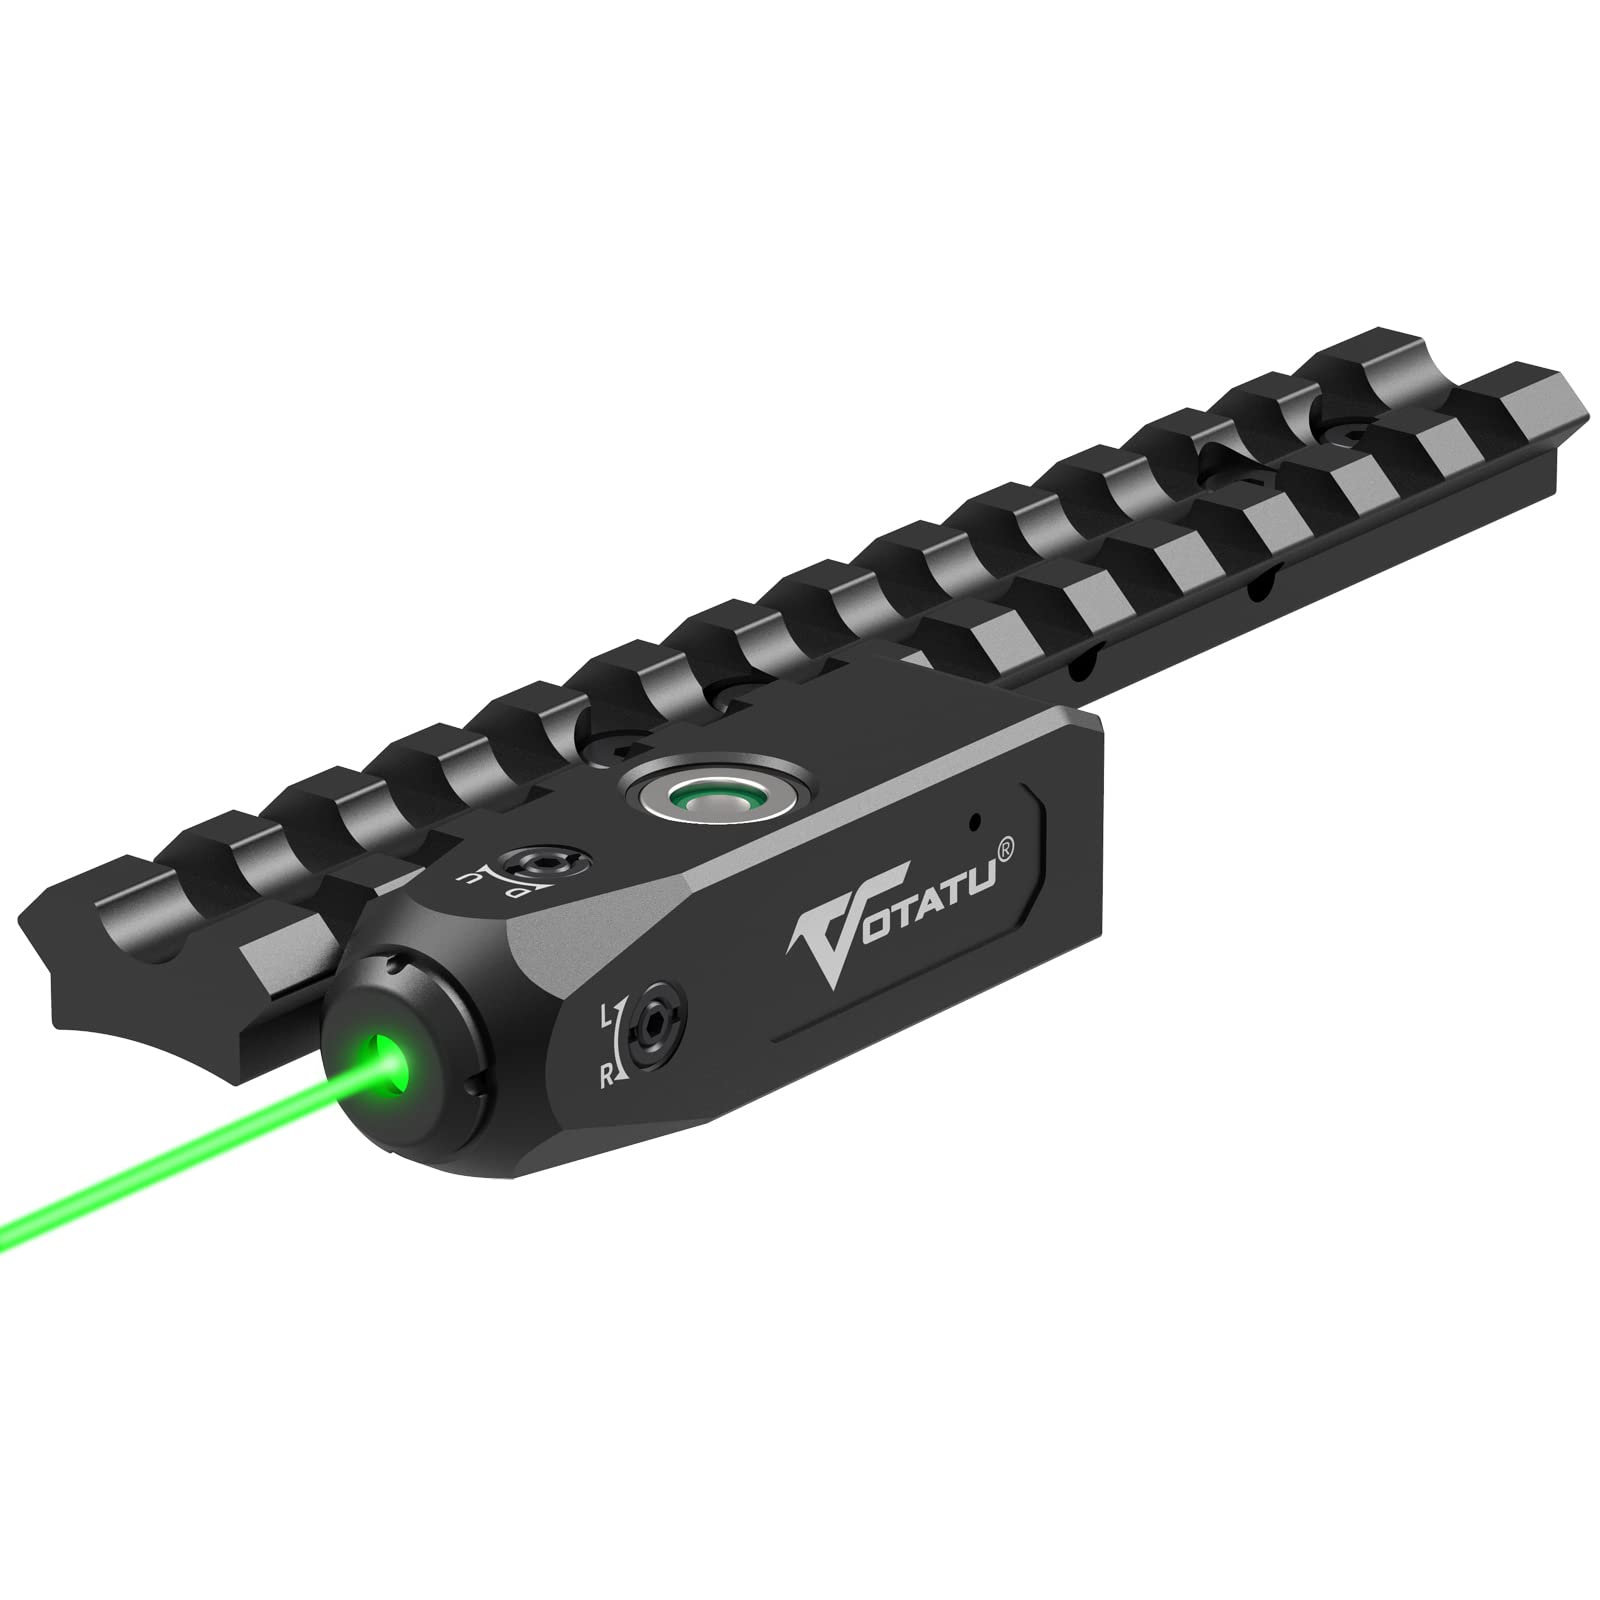 Votatu MBL-G Green Laser Sight with Picatinny Mount Fits Mossberg  Series,Low-Profile Tactical Laser Sight with Strobe Function USB Magnetic  Rechargeable